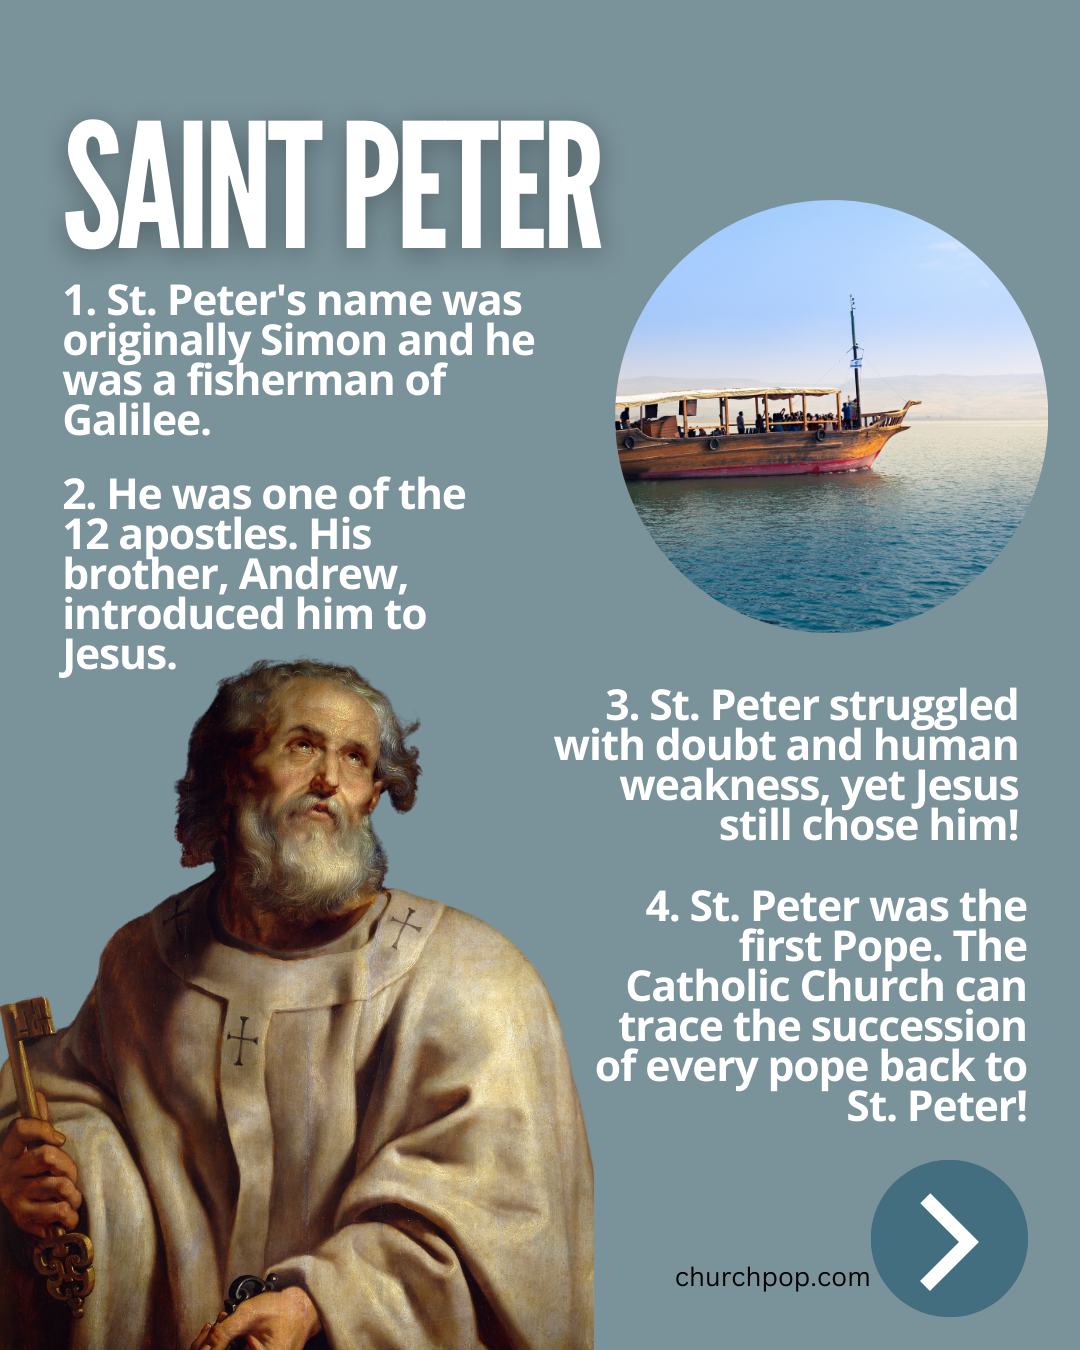 Who is Saint Peter?